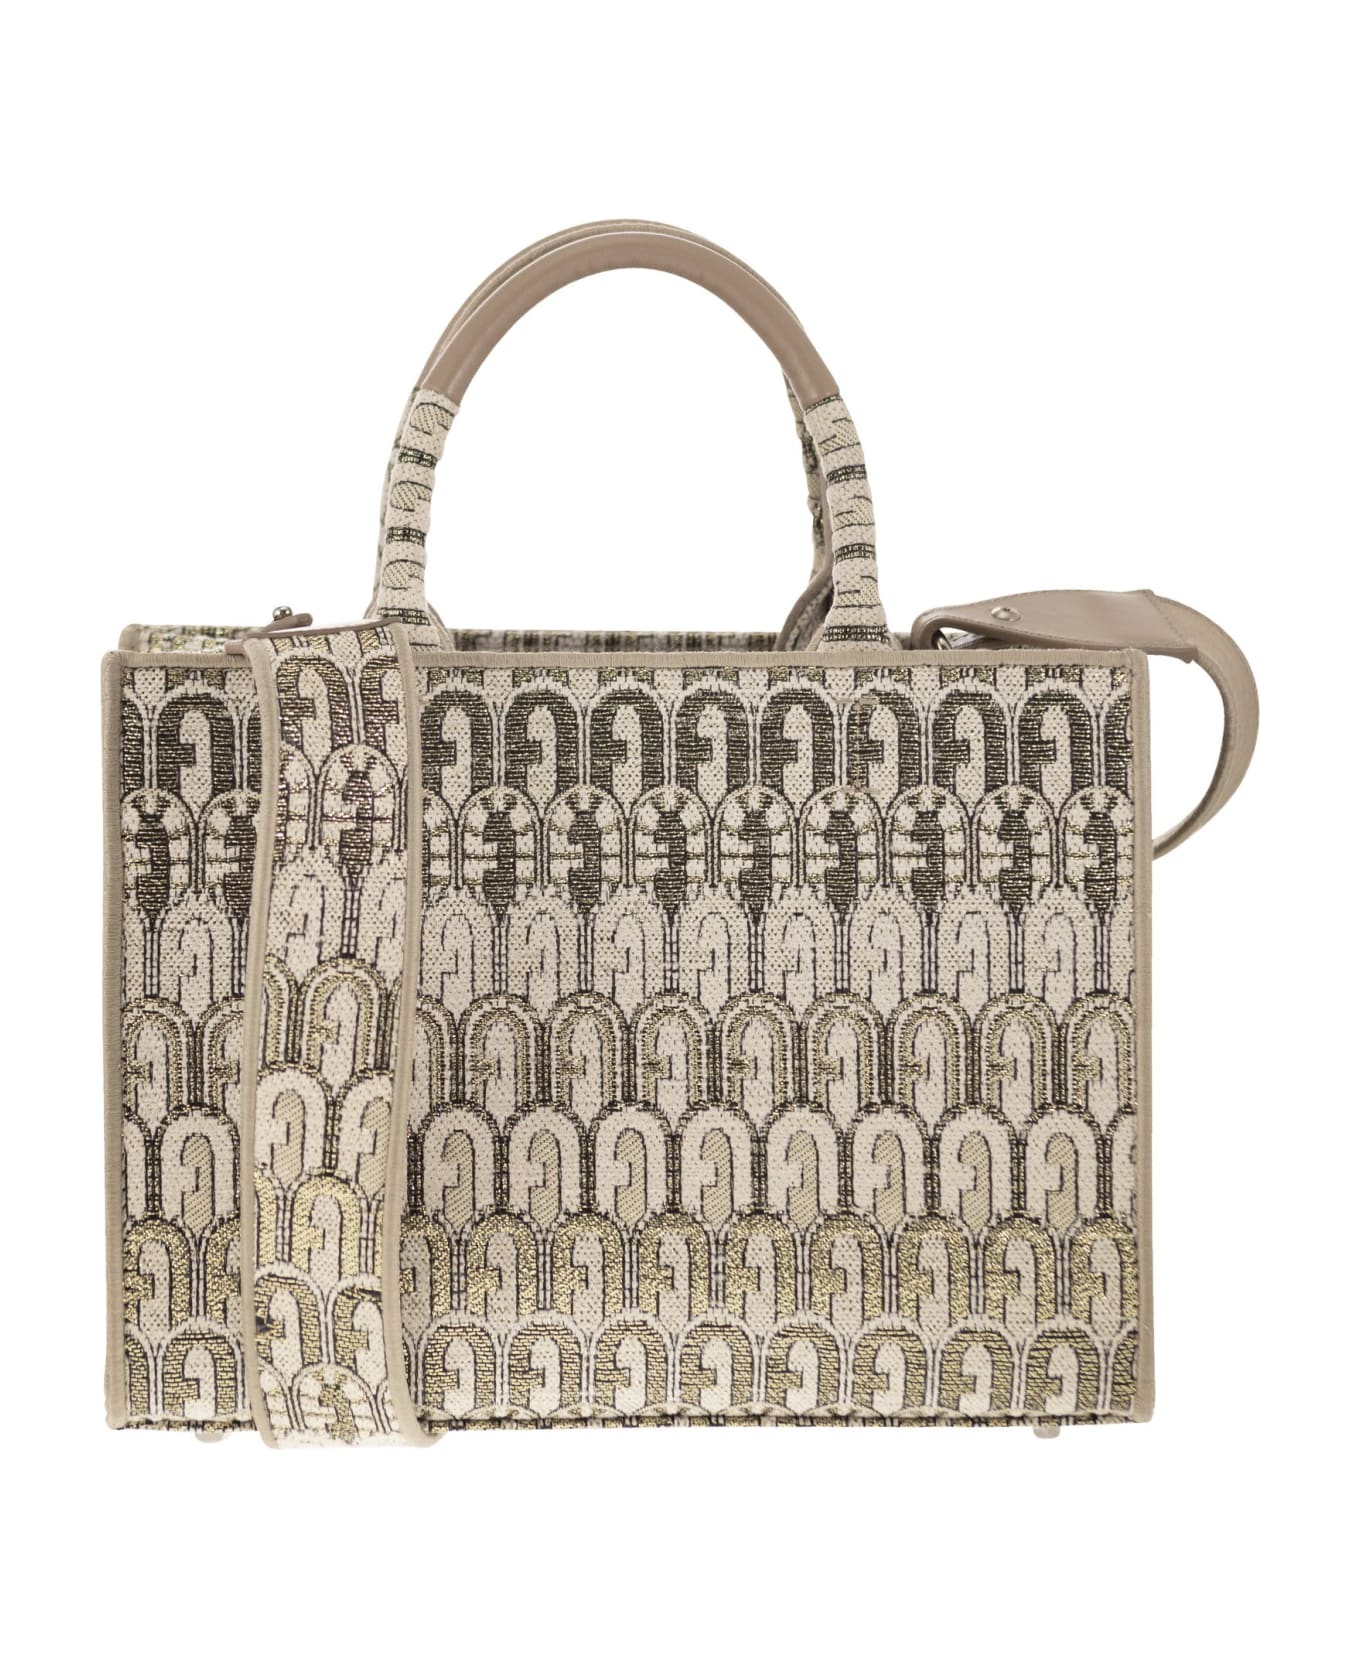 Furla Opportunity - Tote Bag Small - Beige トートバッグ